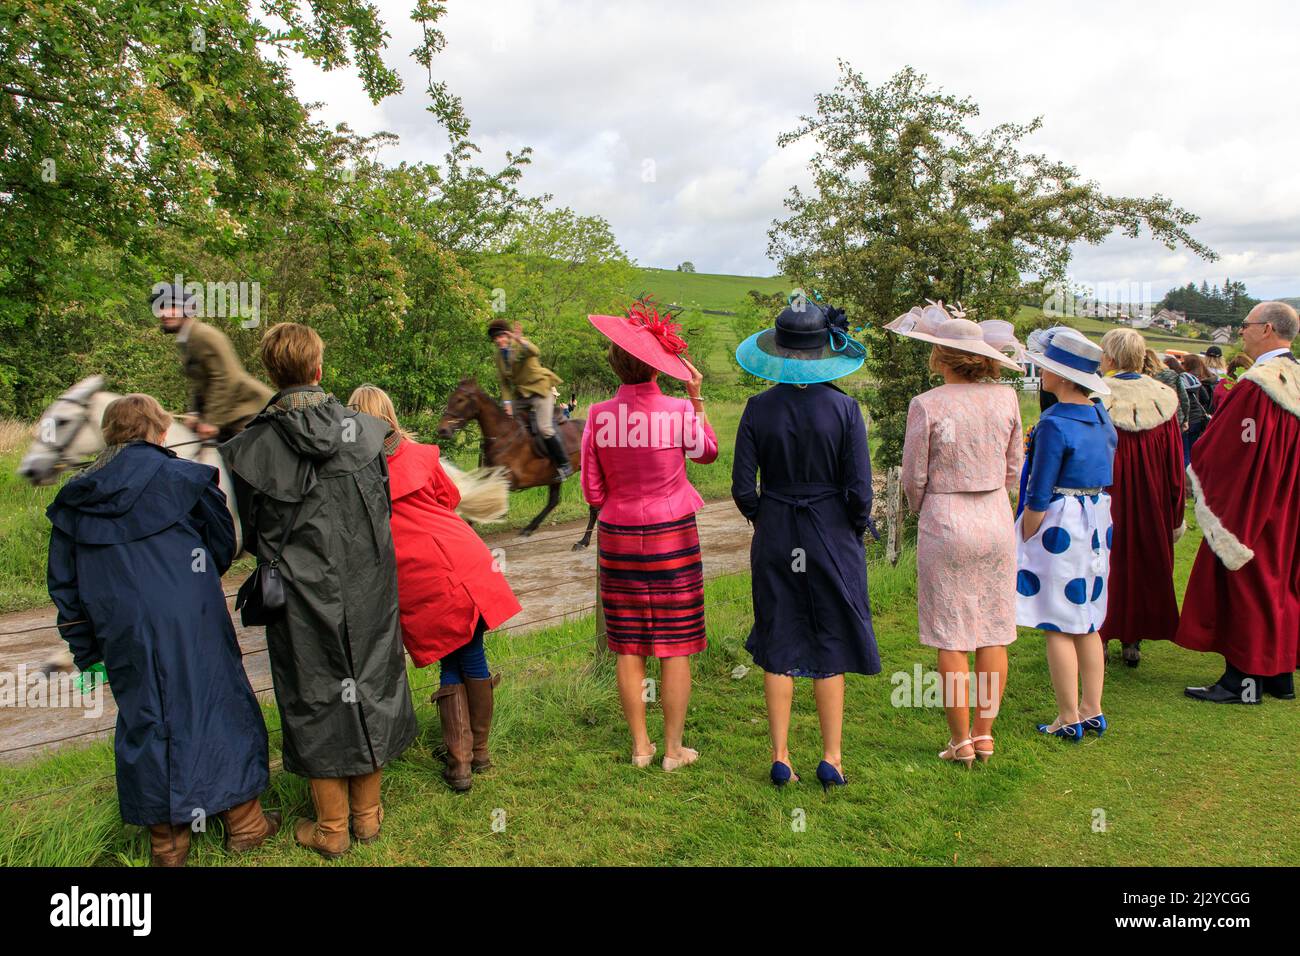 Spectators, horse racing, traditional, cross country, Hawick Common Ridings, guests of honor, hats, Borders, Scotland, UK Stock Photo